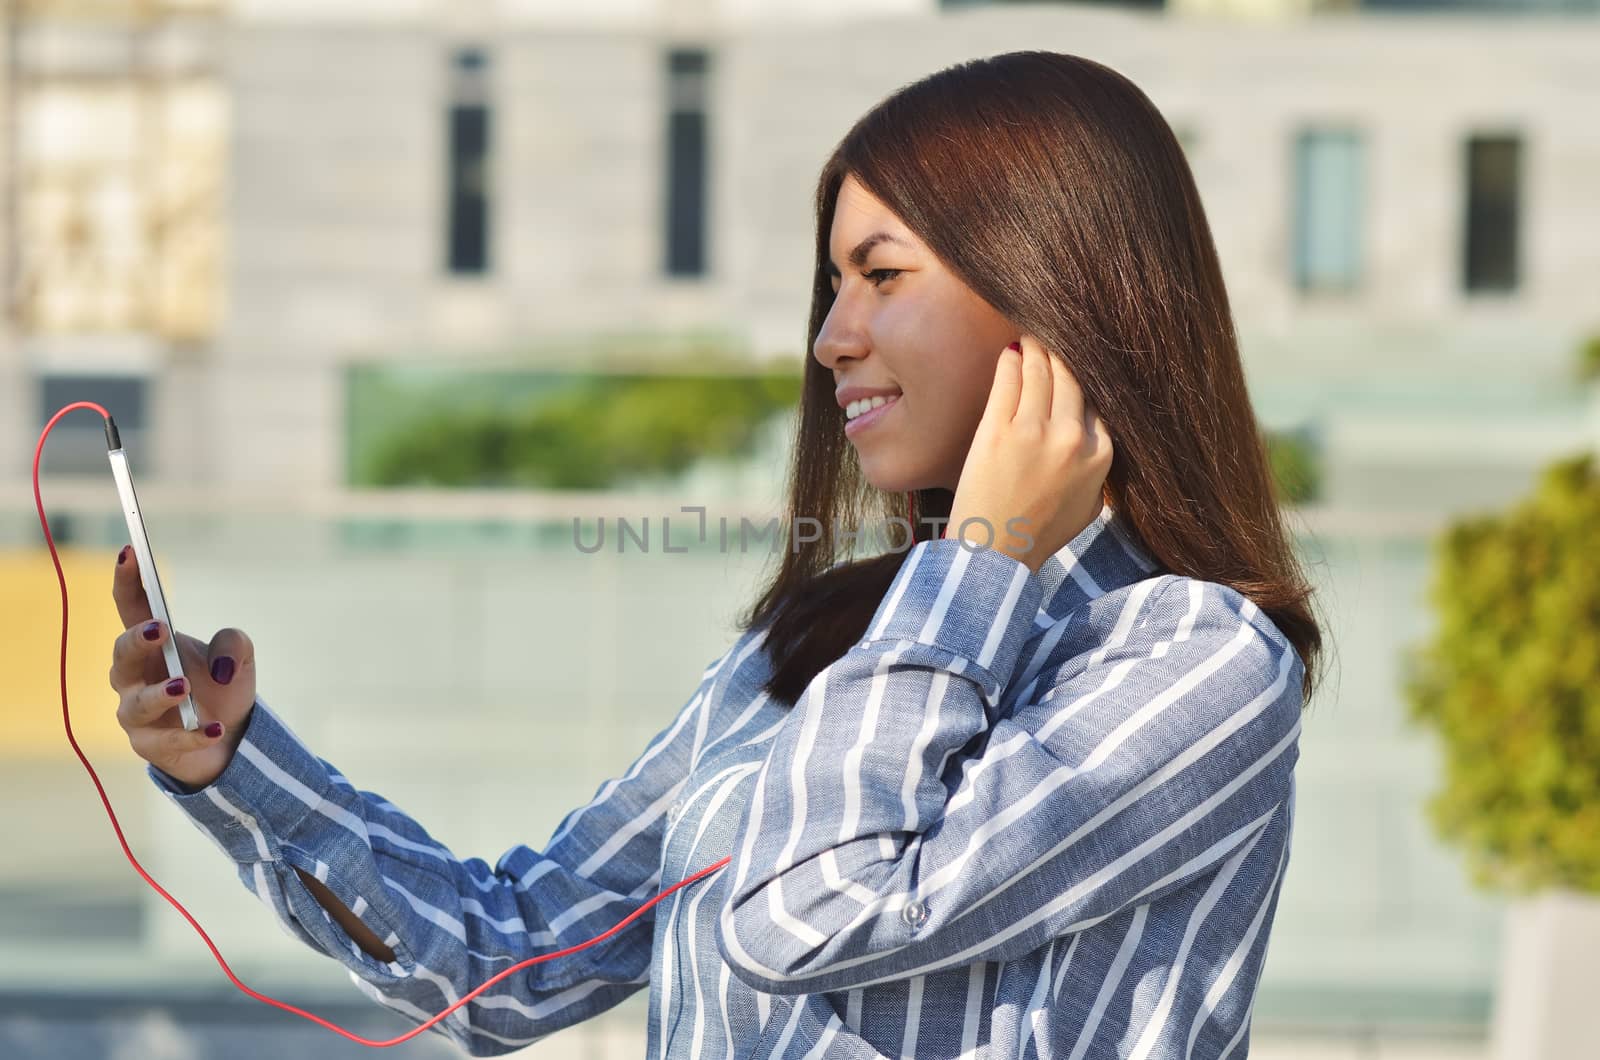 A young girl student of Asian appearance dressed in a striped shirt takes a selfie and listens to music while on the street